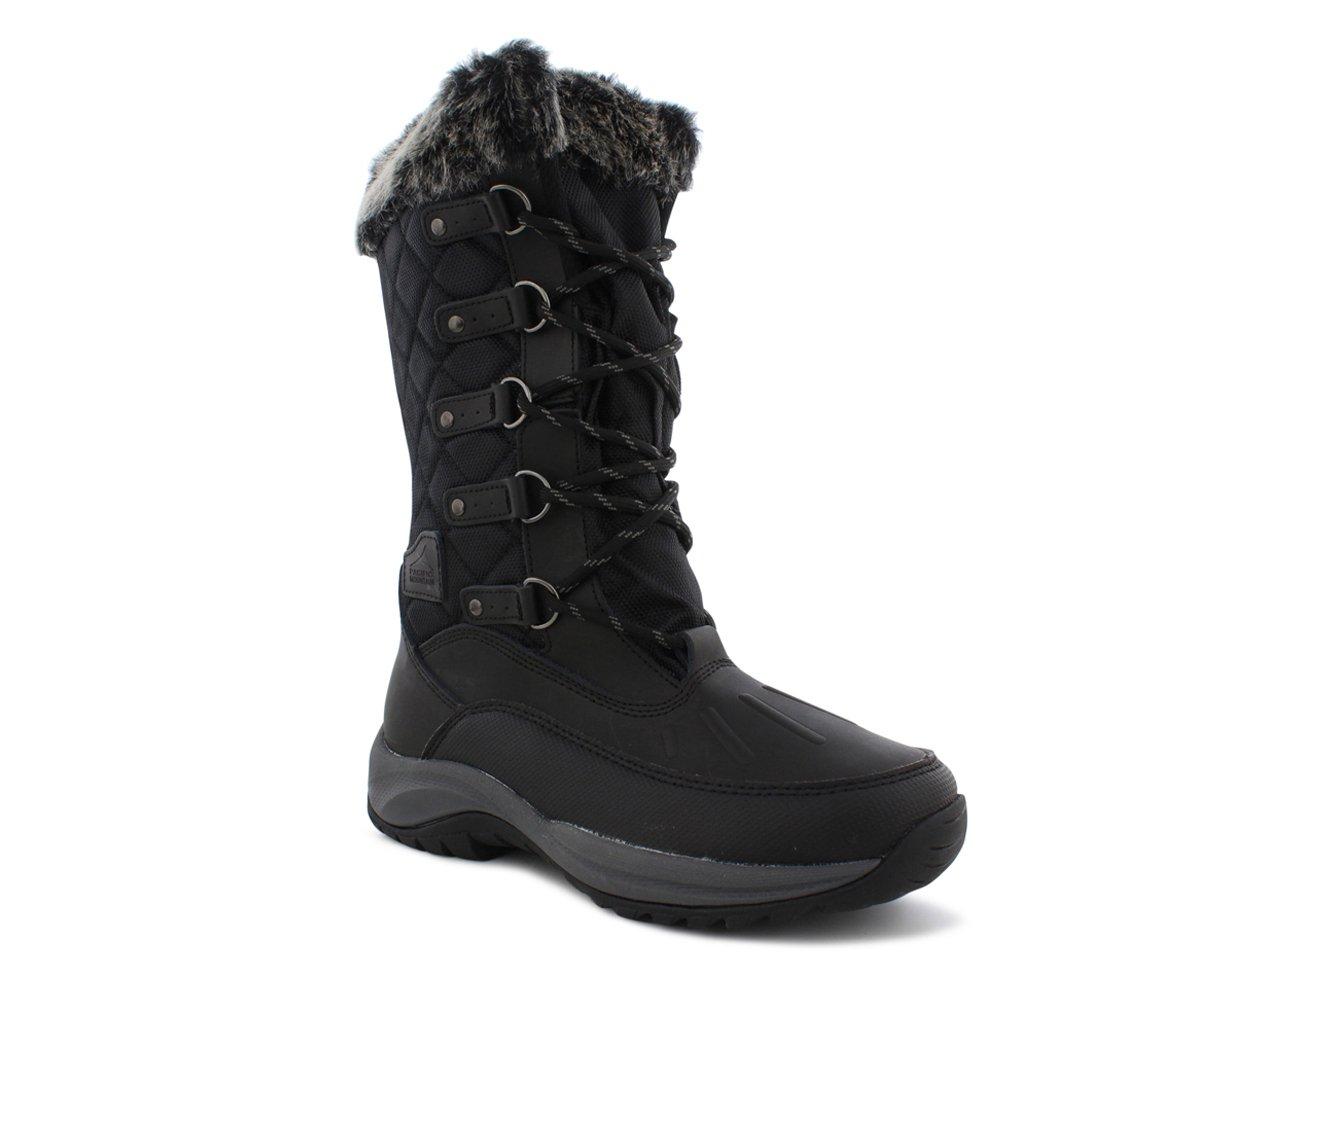 Women's Pacific Mountain Whiteout Winter Boots | Shoe Carnival